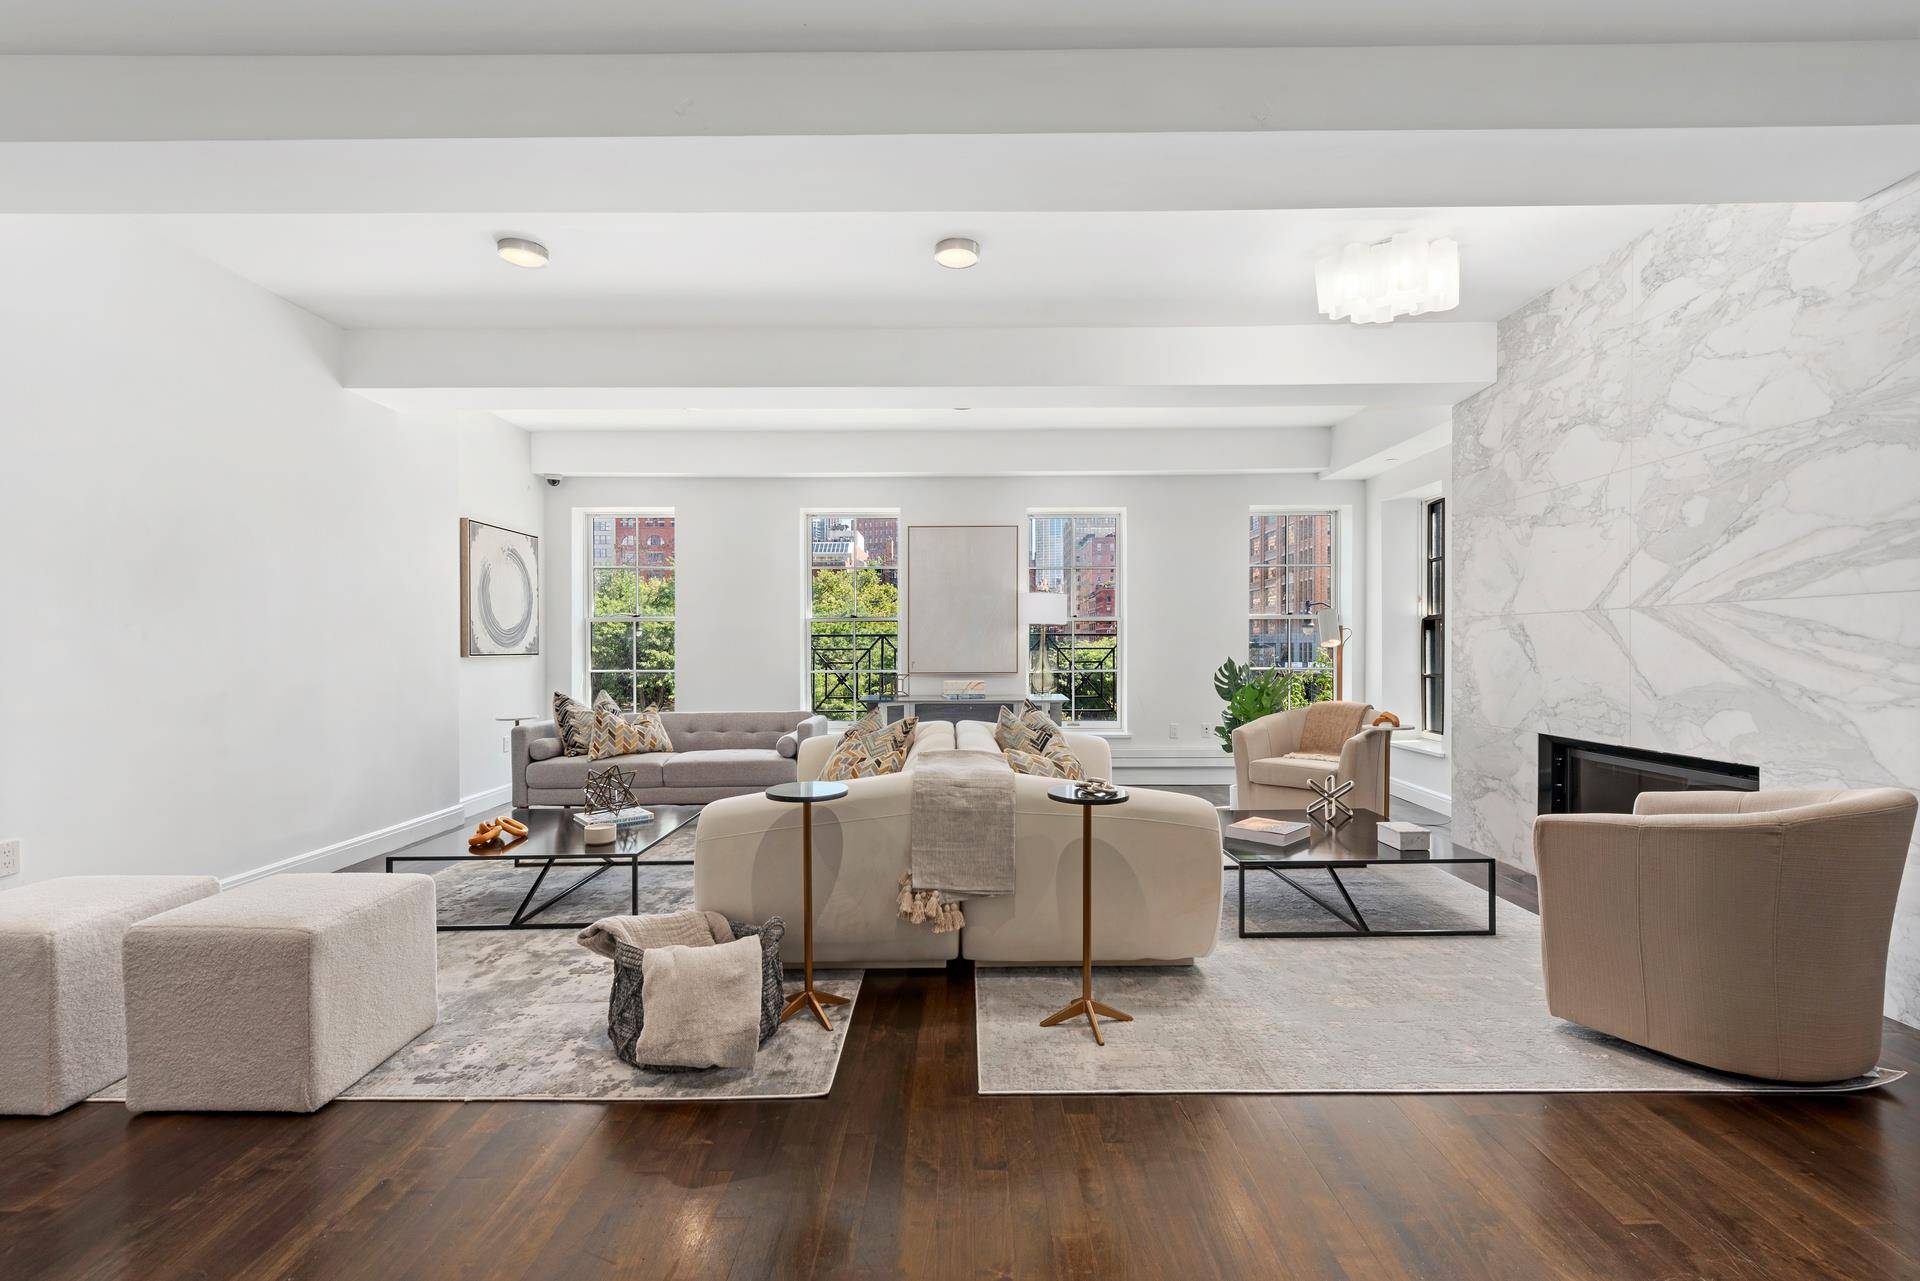 Stretch out and relax in comfort and style in this magnificent five bedroom, four and a half bathroom triplex loft nestled on a quintessential Tribeca cobblestone street with a PRIVATE ...